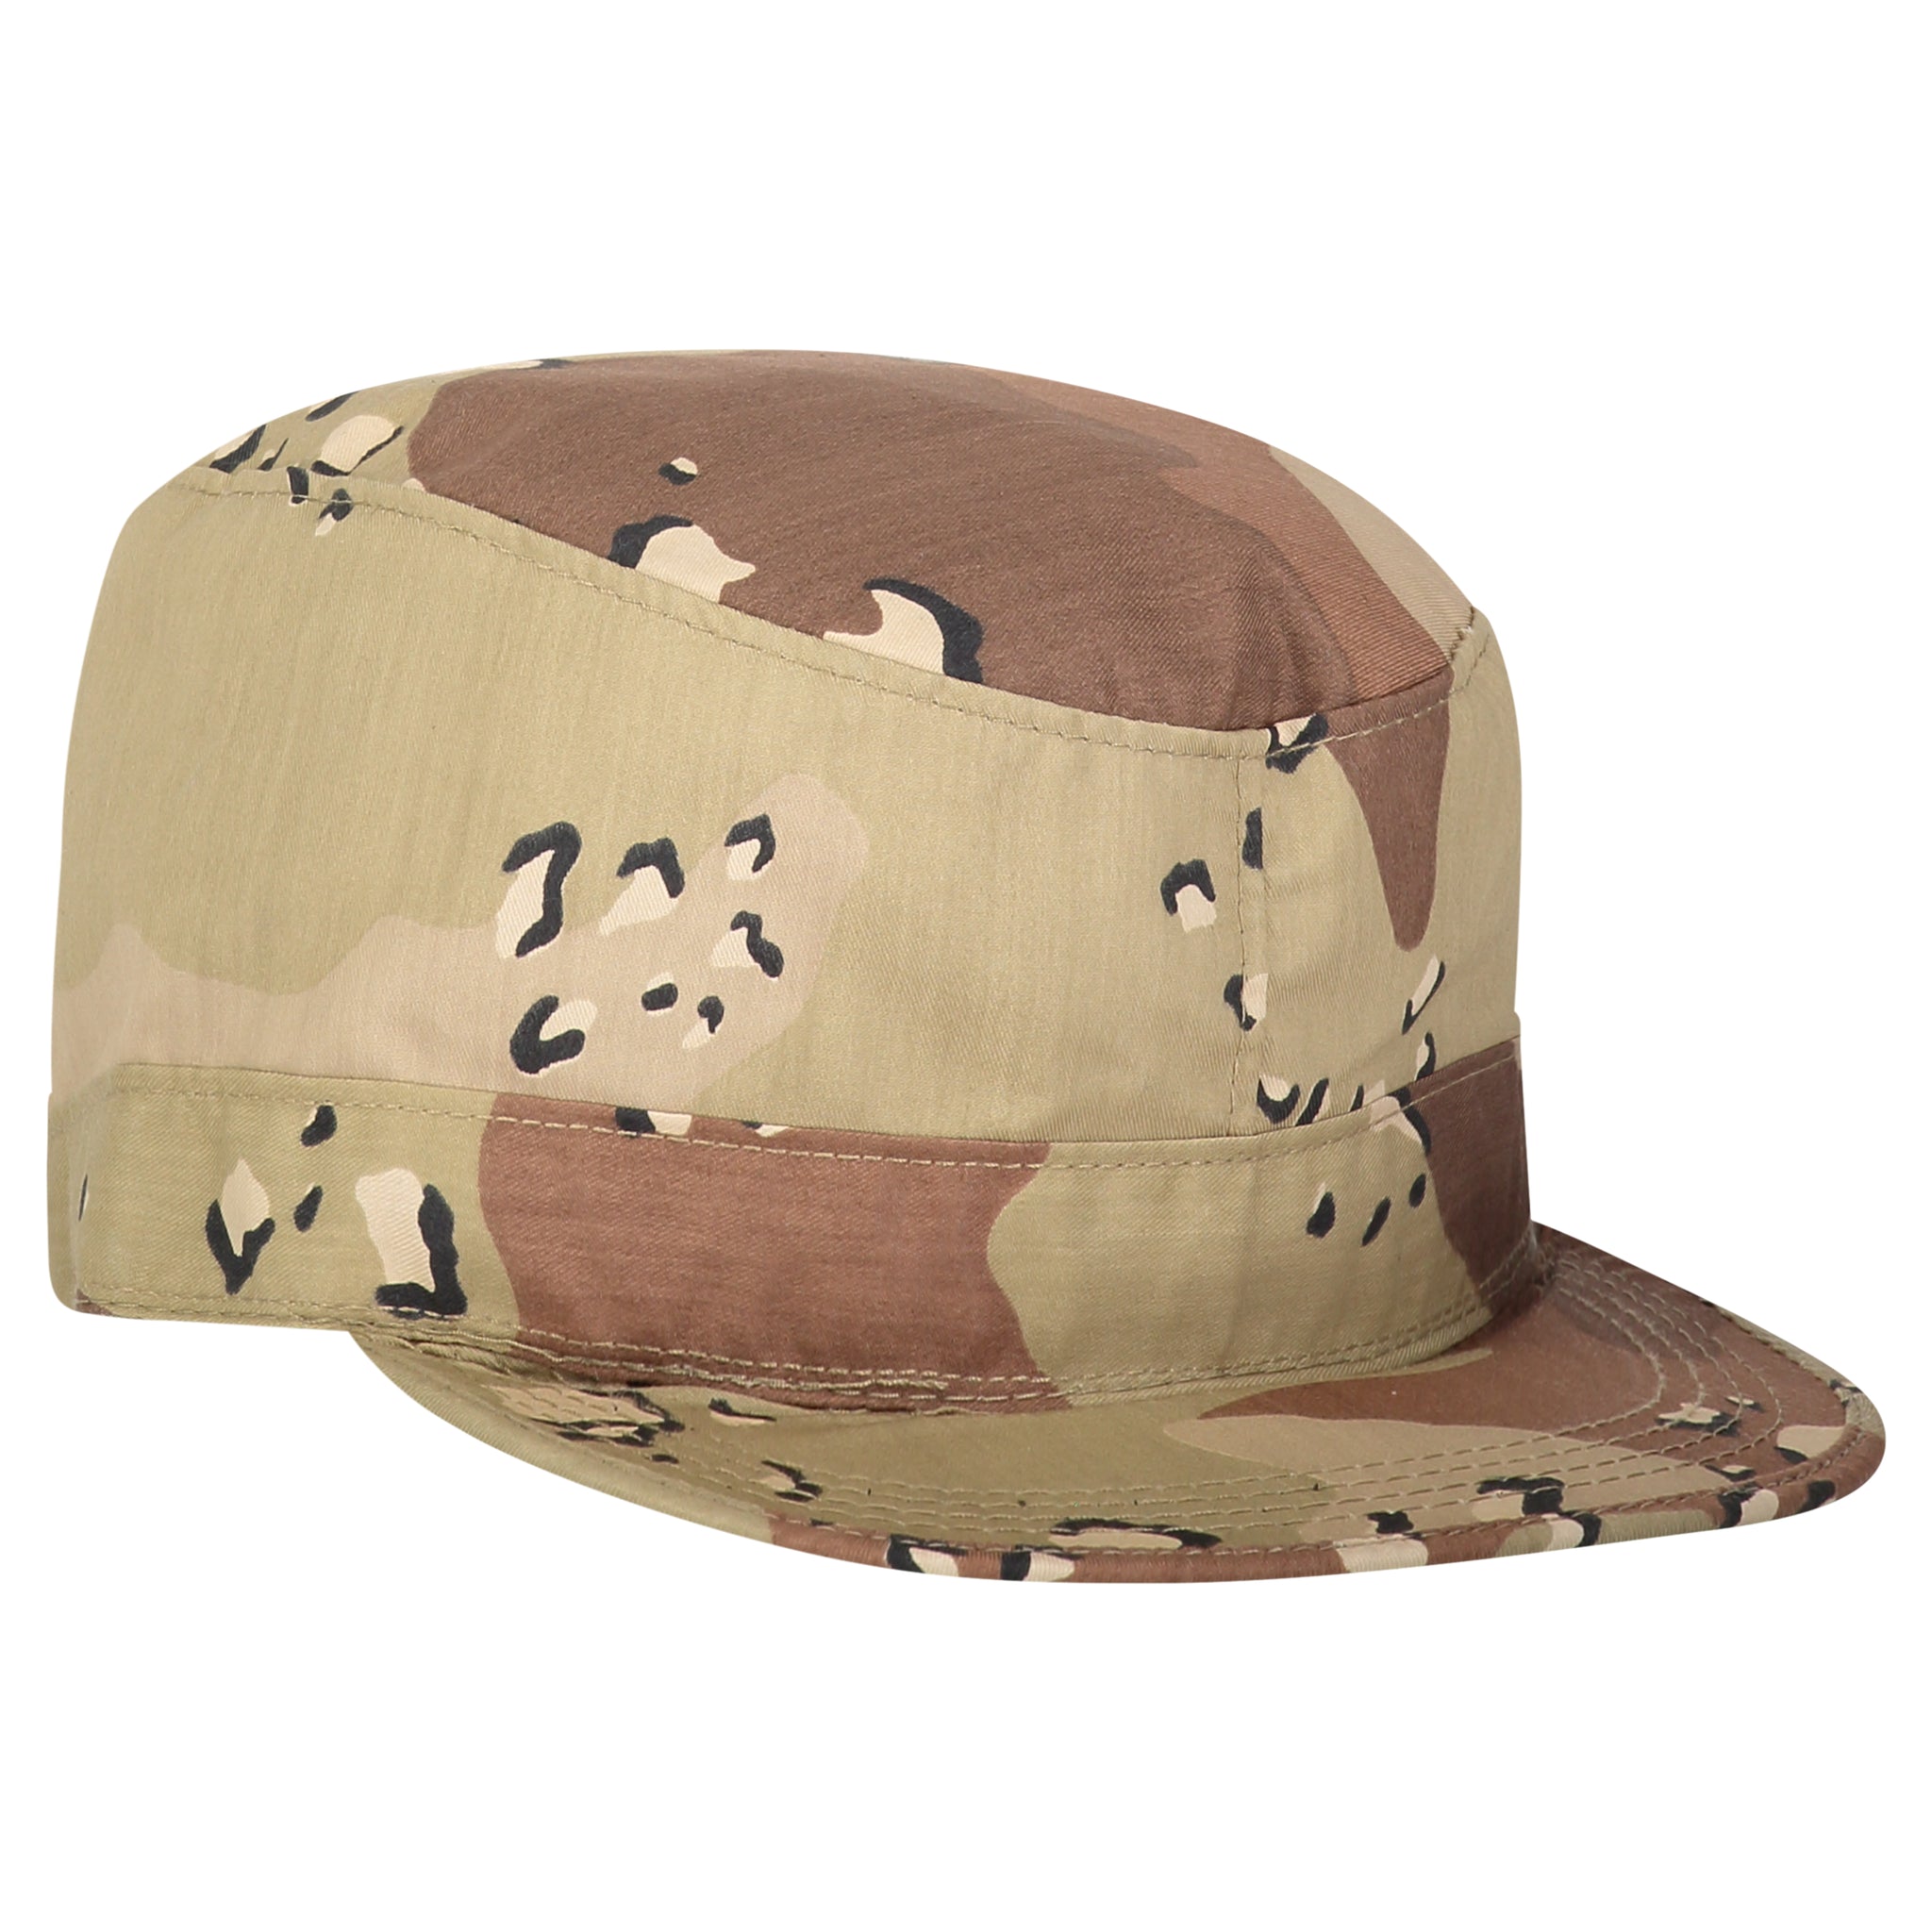 Cap Military McGuire Navy – Combat Style Army